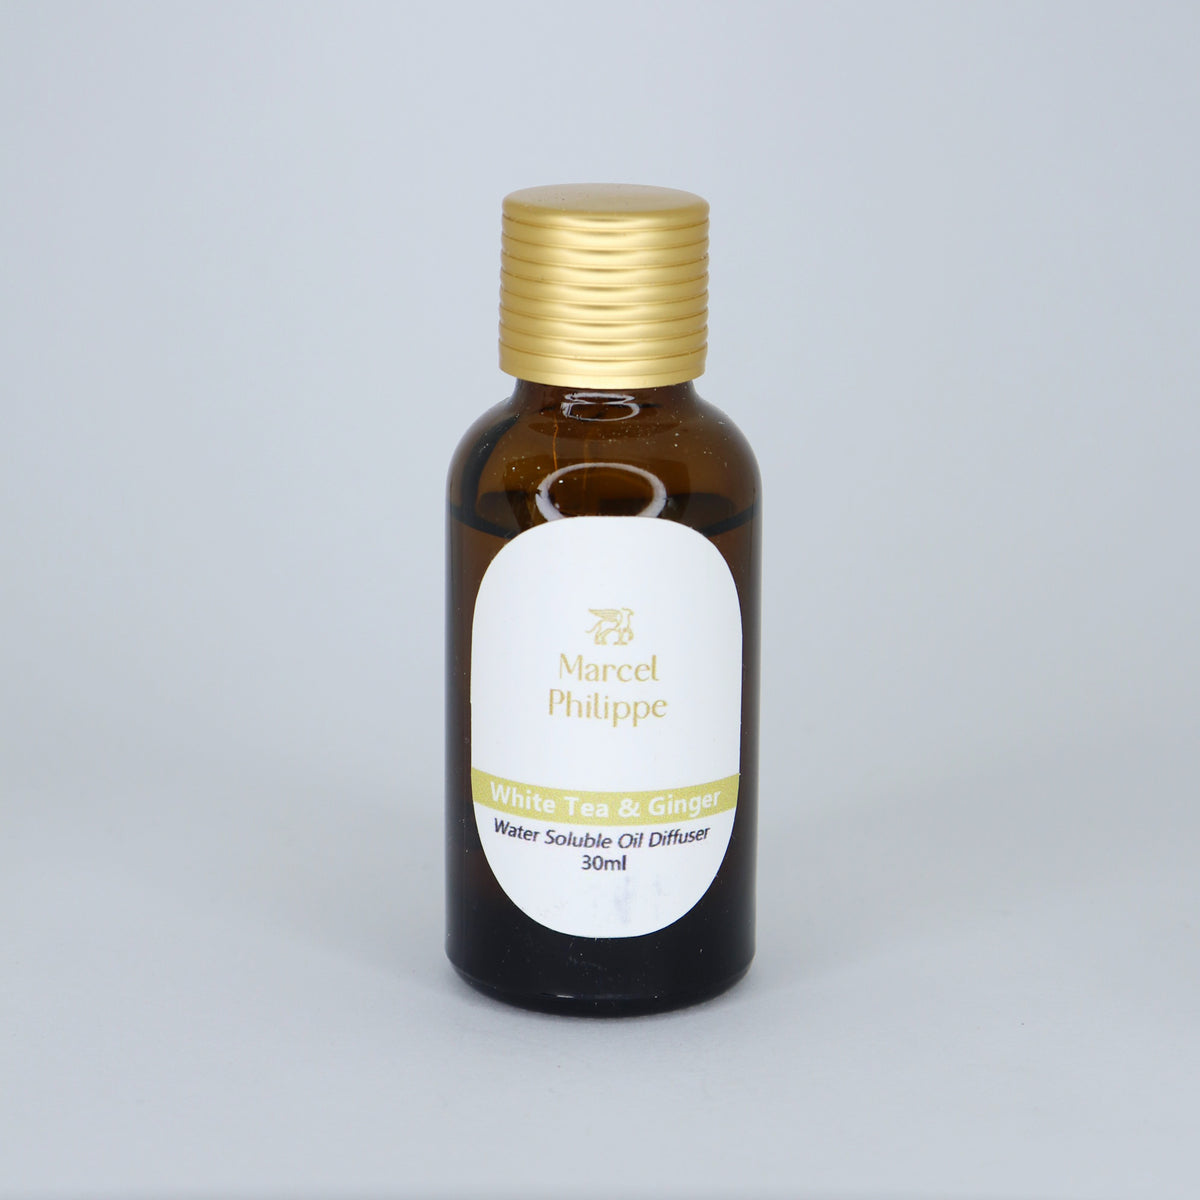 Marcel Philippe Water Soluble Oil Diffuser 30ml